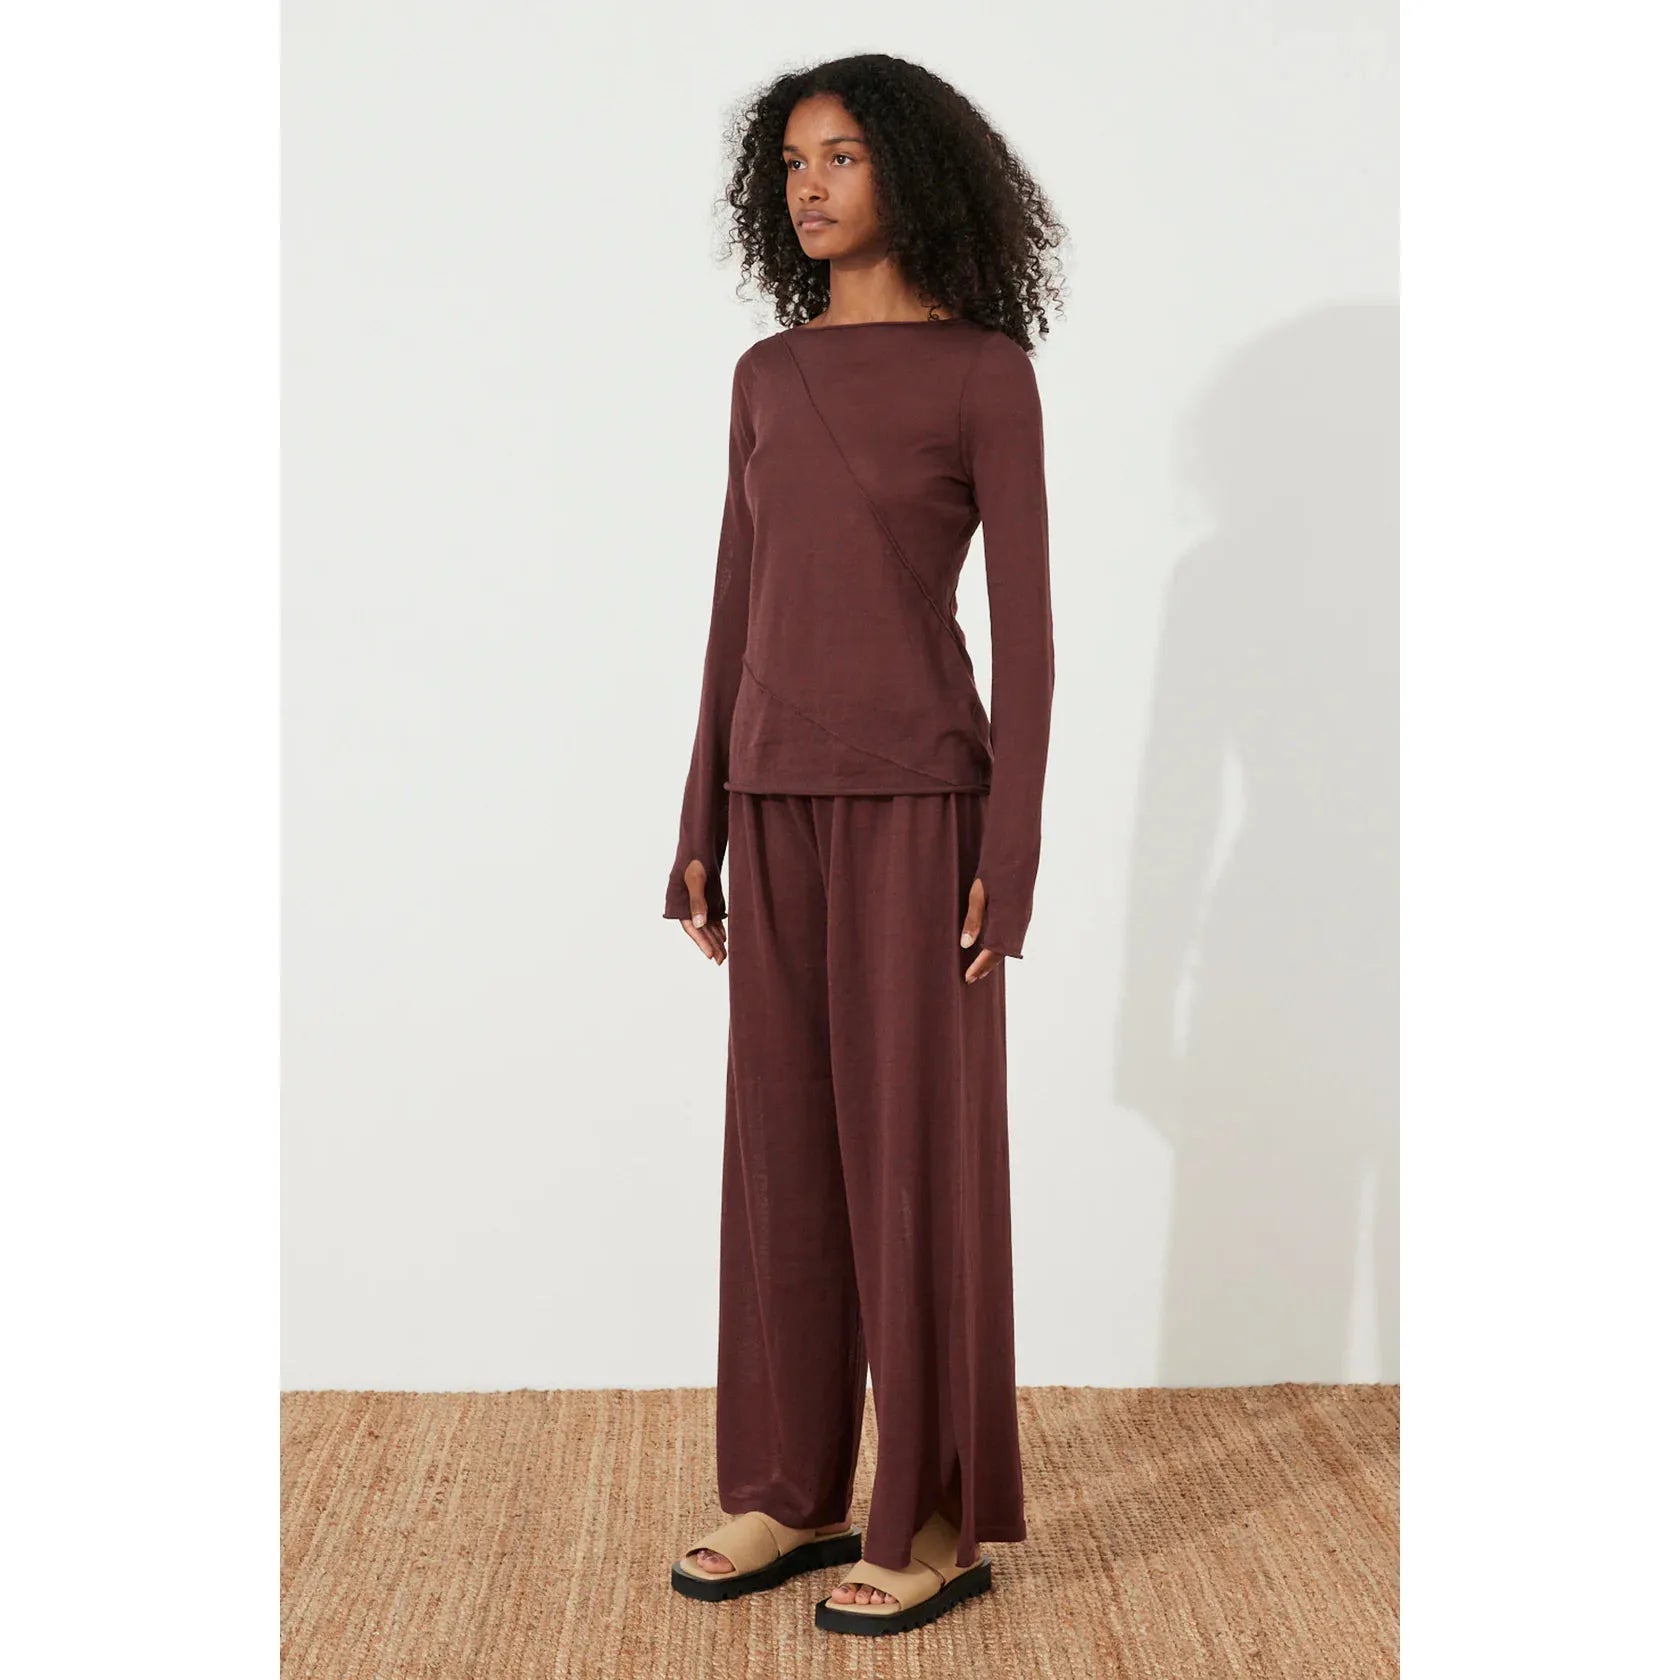 Zulu & Zephyr Currant Relaxed Knit Pant